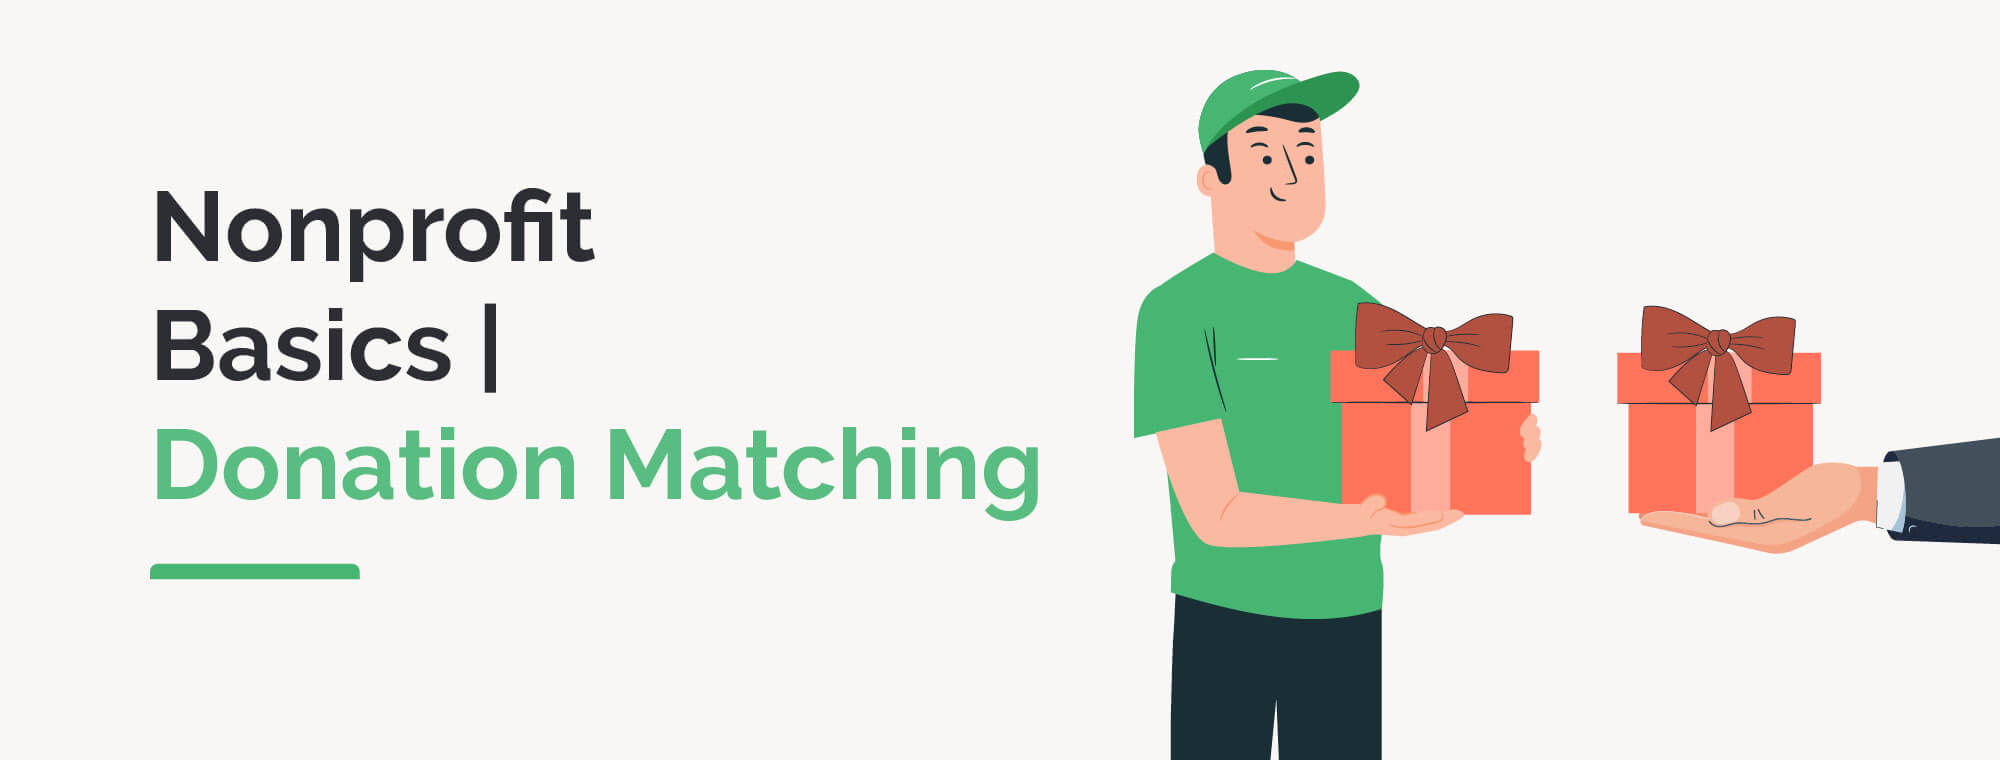 Learn about donation matching with this quick guide.